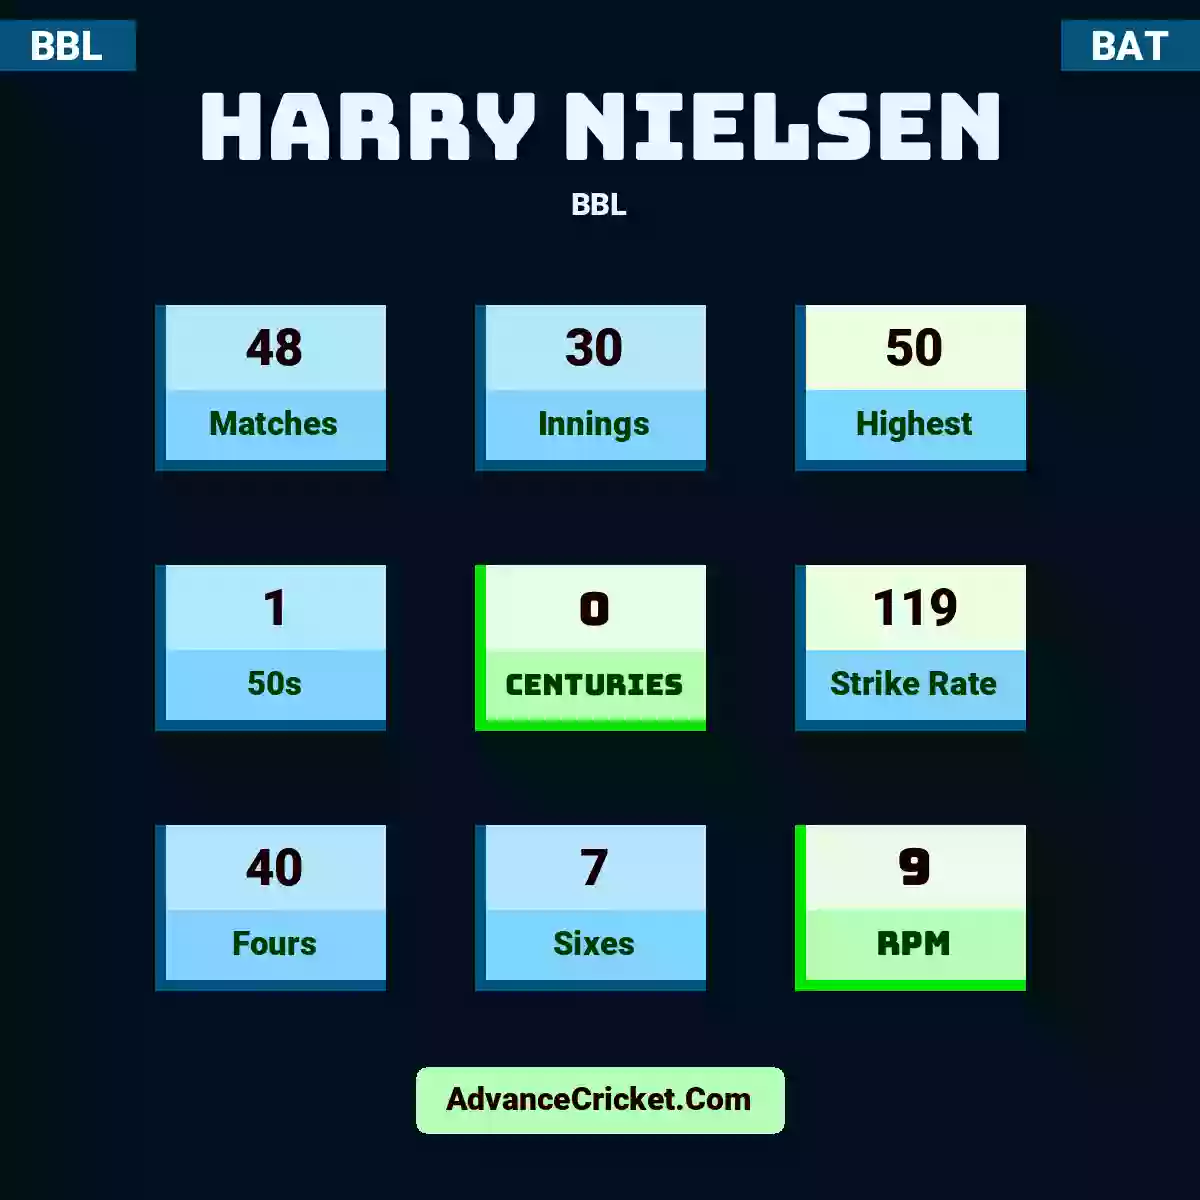 Harry Nielsen BBL , Harry Nielsen played 48 matches, scored 50 runs as highest, 1 half-centuries, and 0 centuries, with a strike rate of 119. H.Nielsen hit 40 fours and 7 sixes, with an RPM of 9.